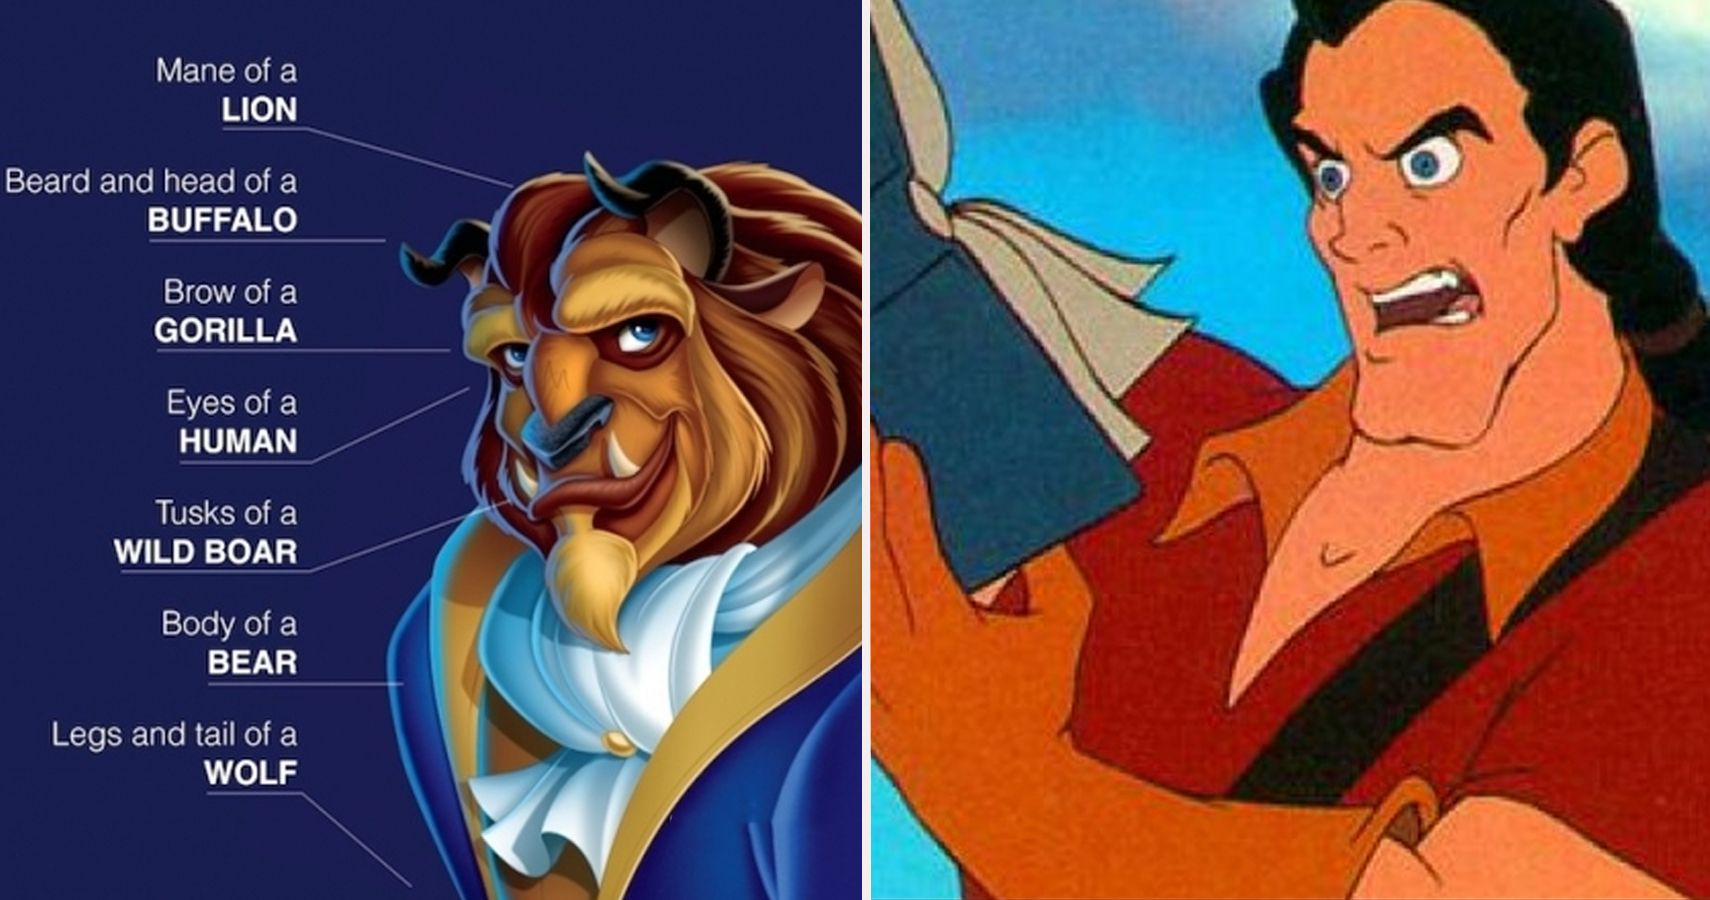 Beauty And The Beast 25 Hidden Secrets Things Only True Disney Fans Noticed